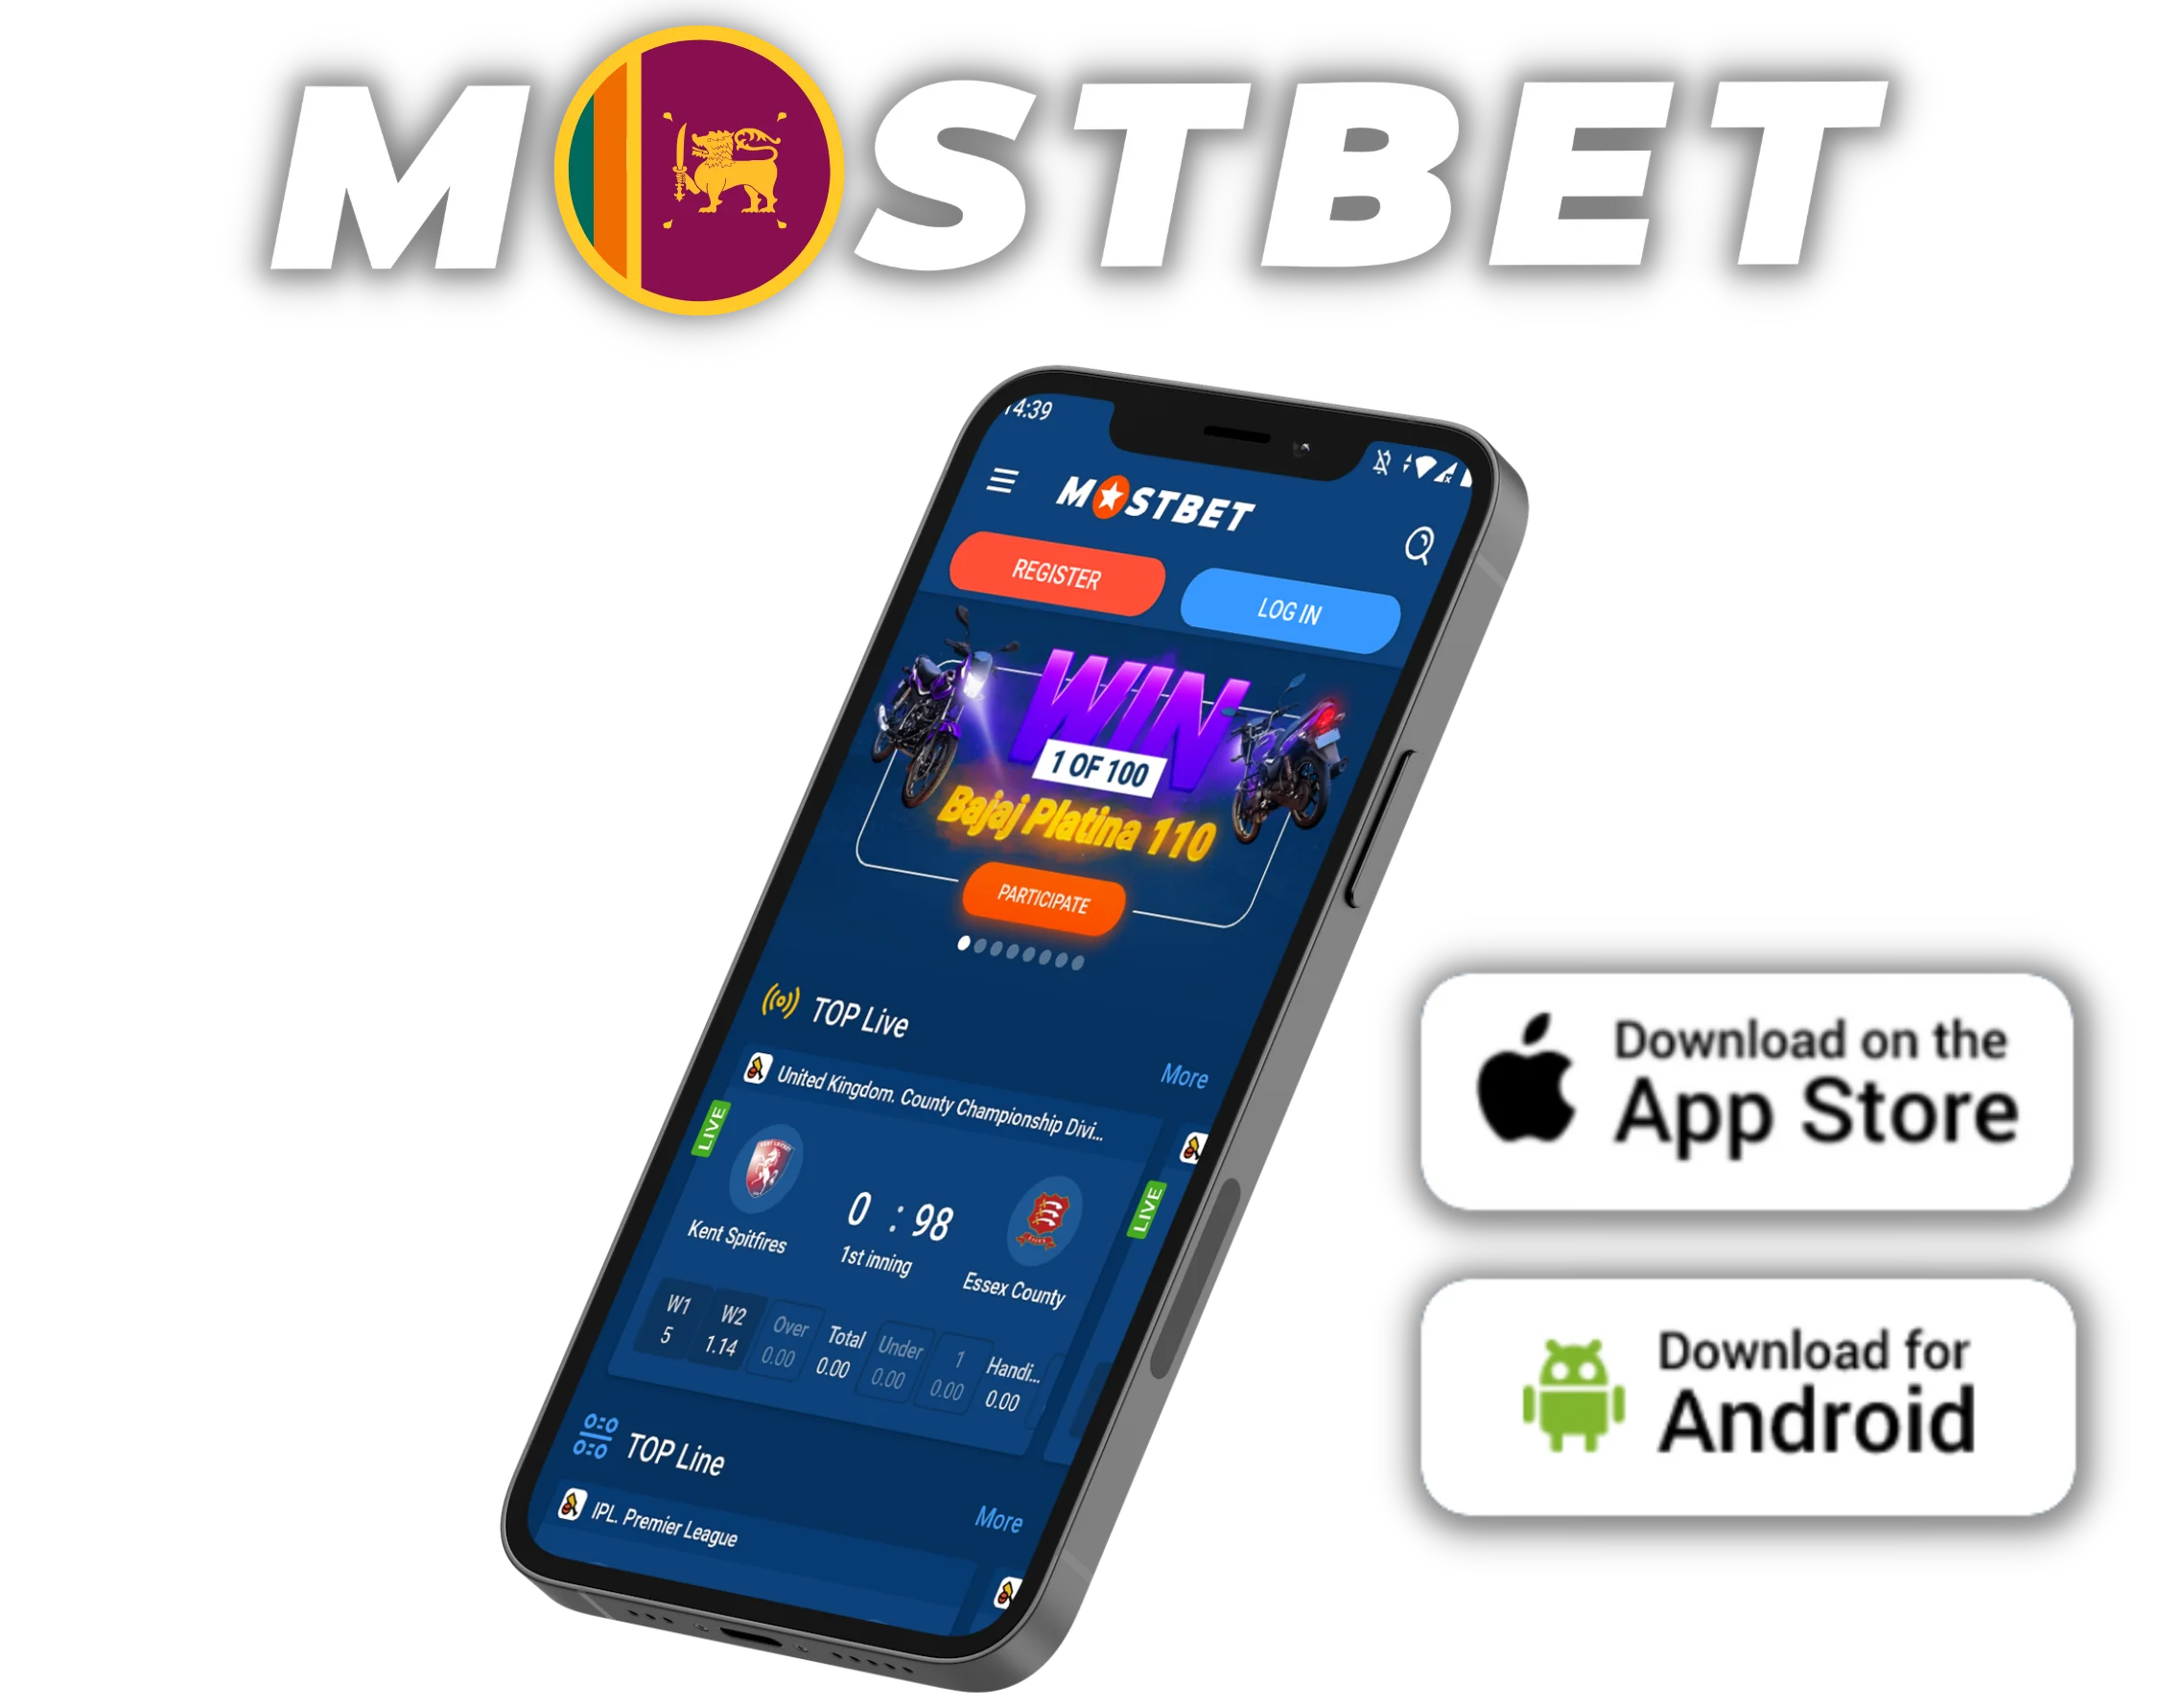 10 Secret Things You Didn't Know About Букмекерская контора Mostbet